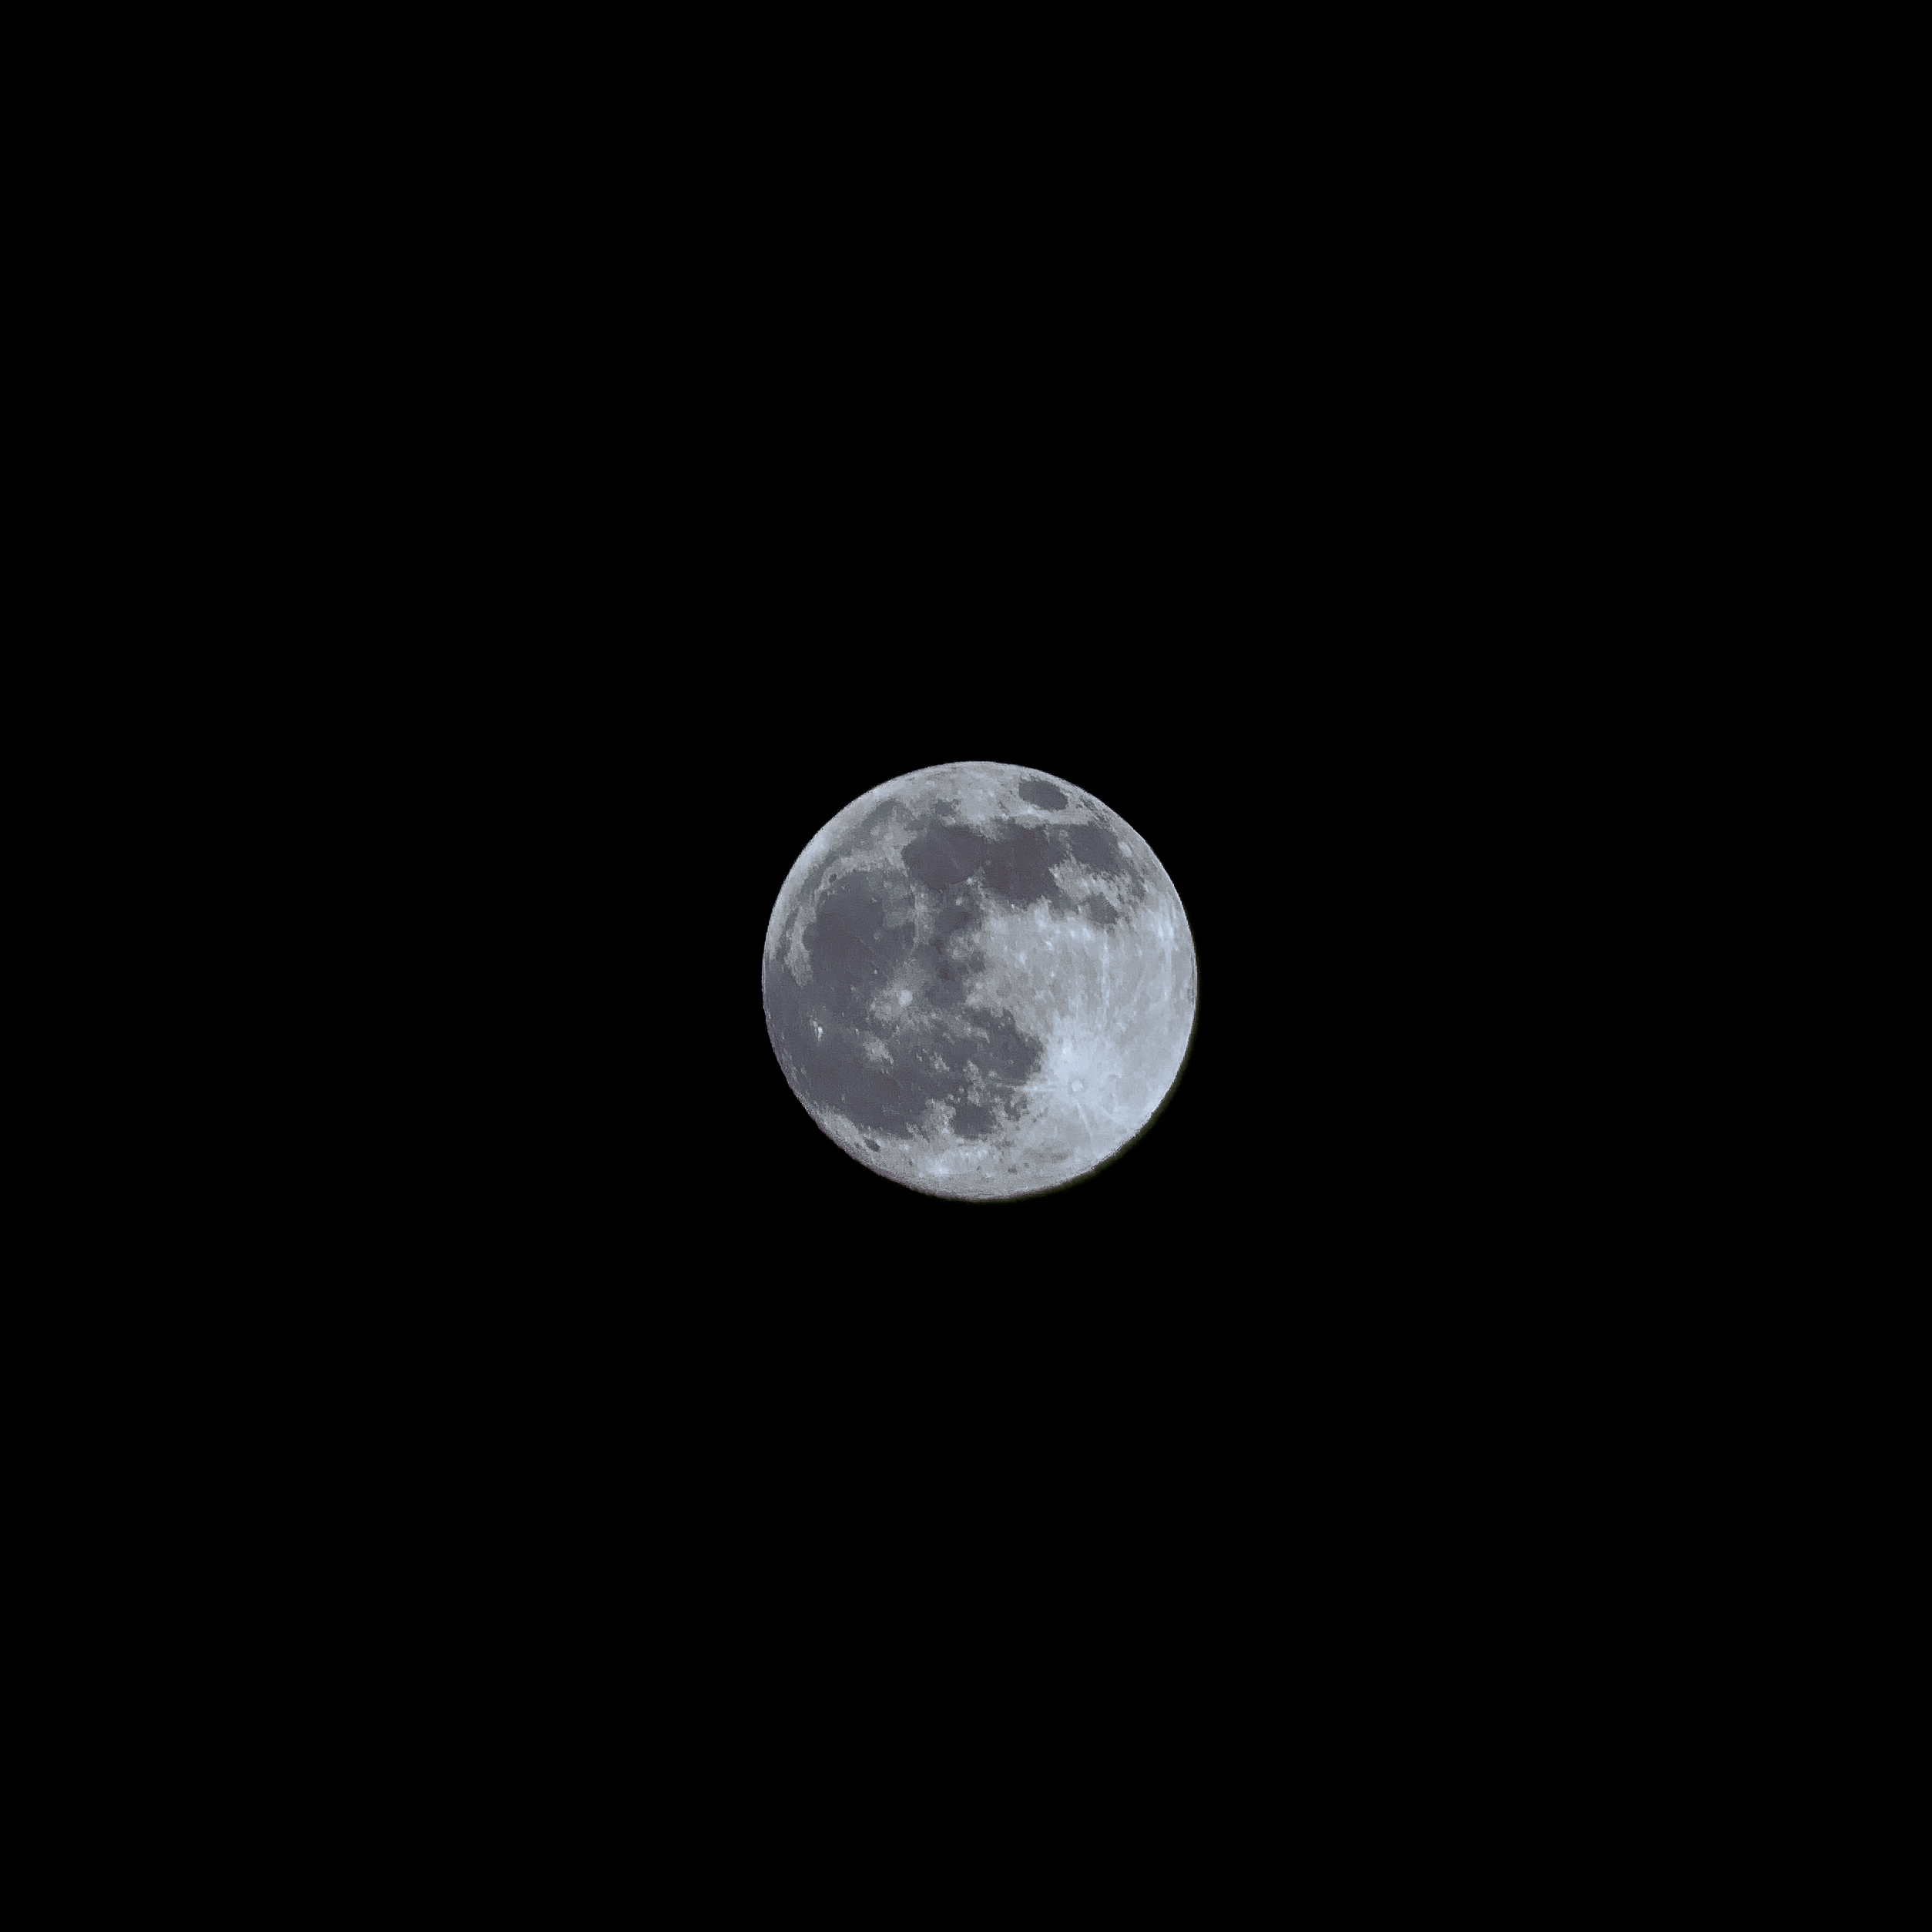 A picture of the Moon